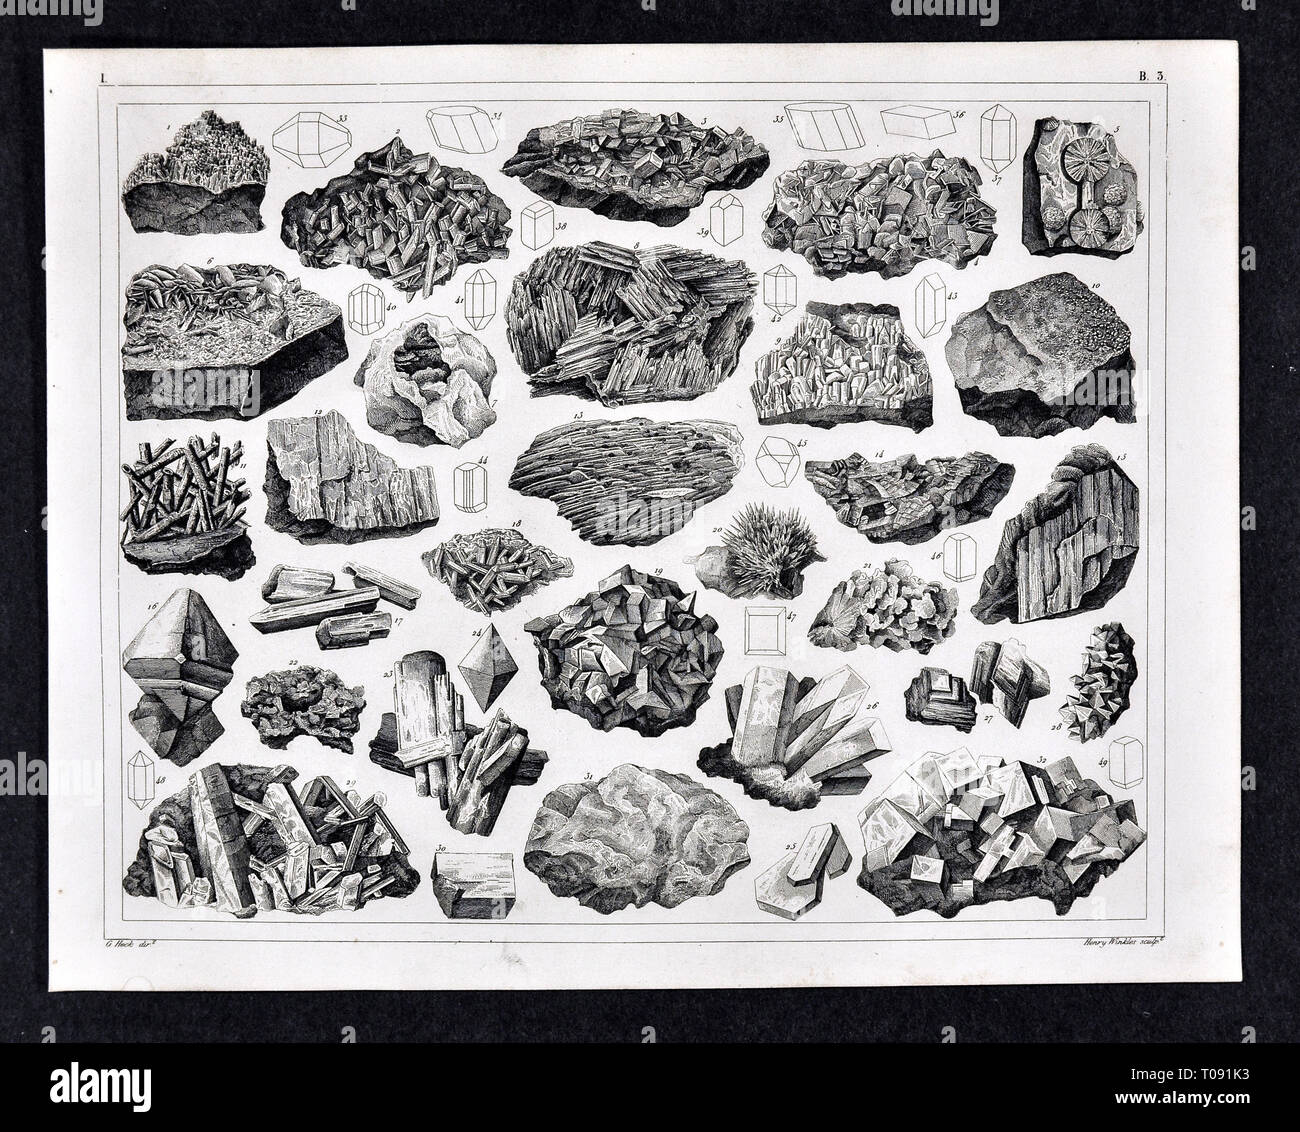 1849 Bilder Geological Print of Rocks and Minerals showing various Crystal Formations Stock Photo